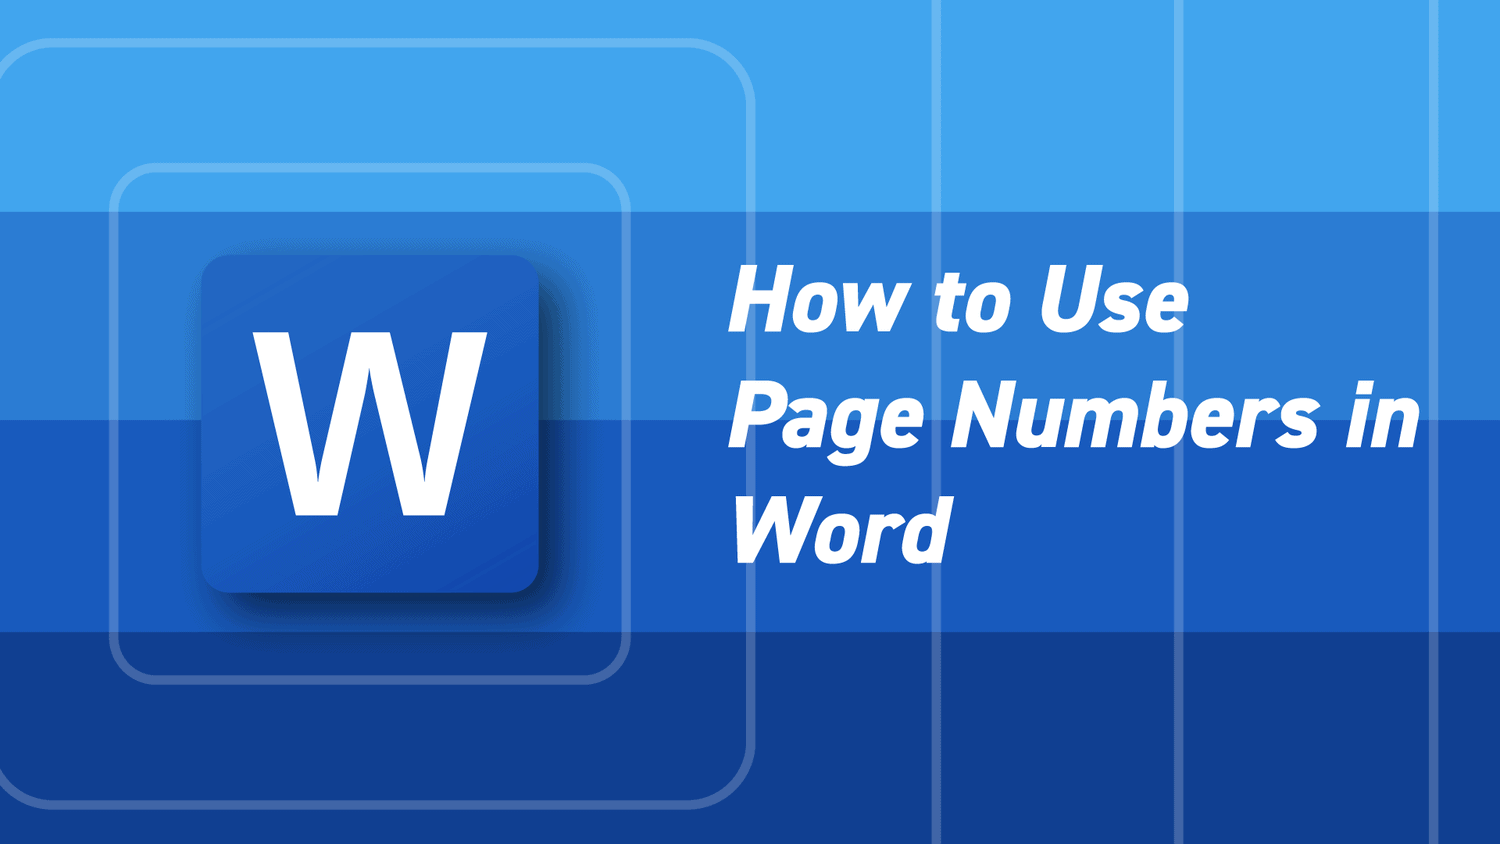 How to Insert, Delete, and Change Page Numbers in Word